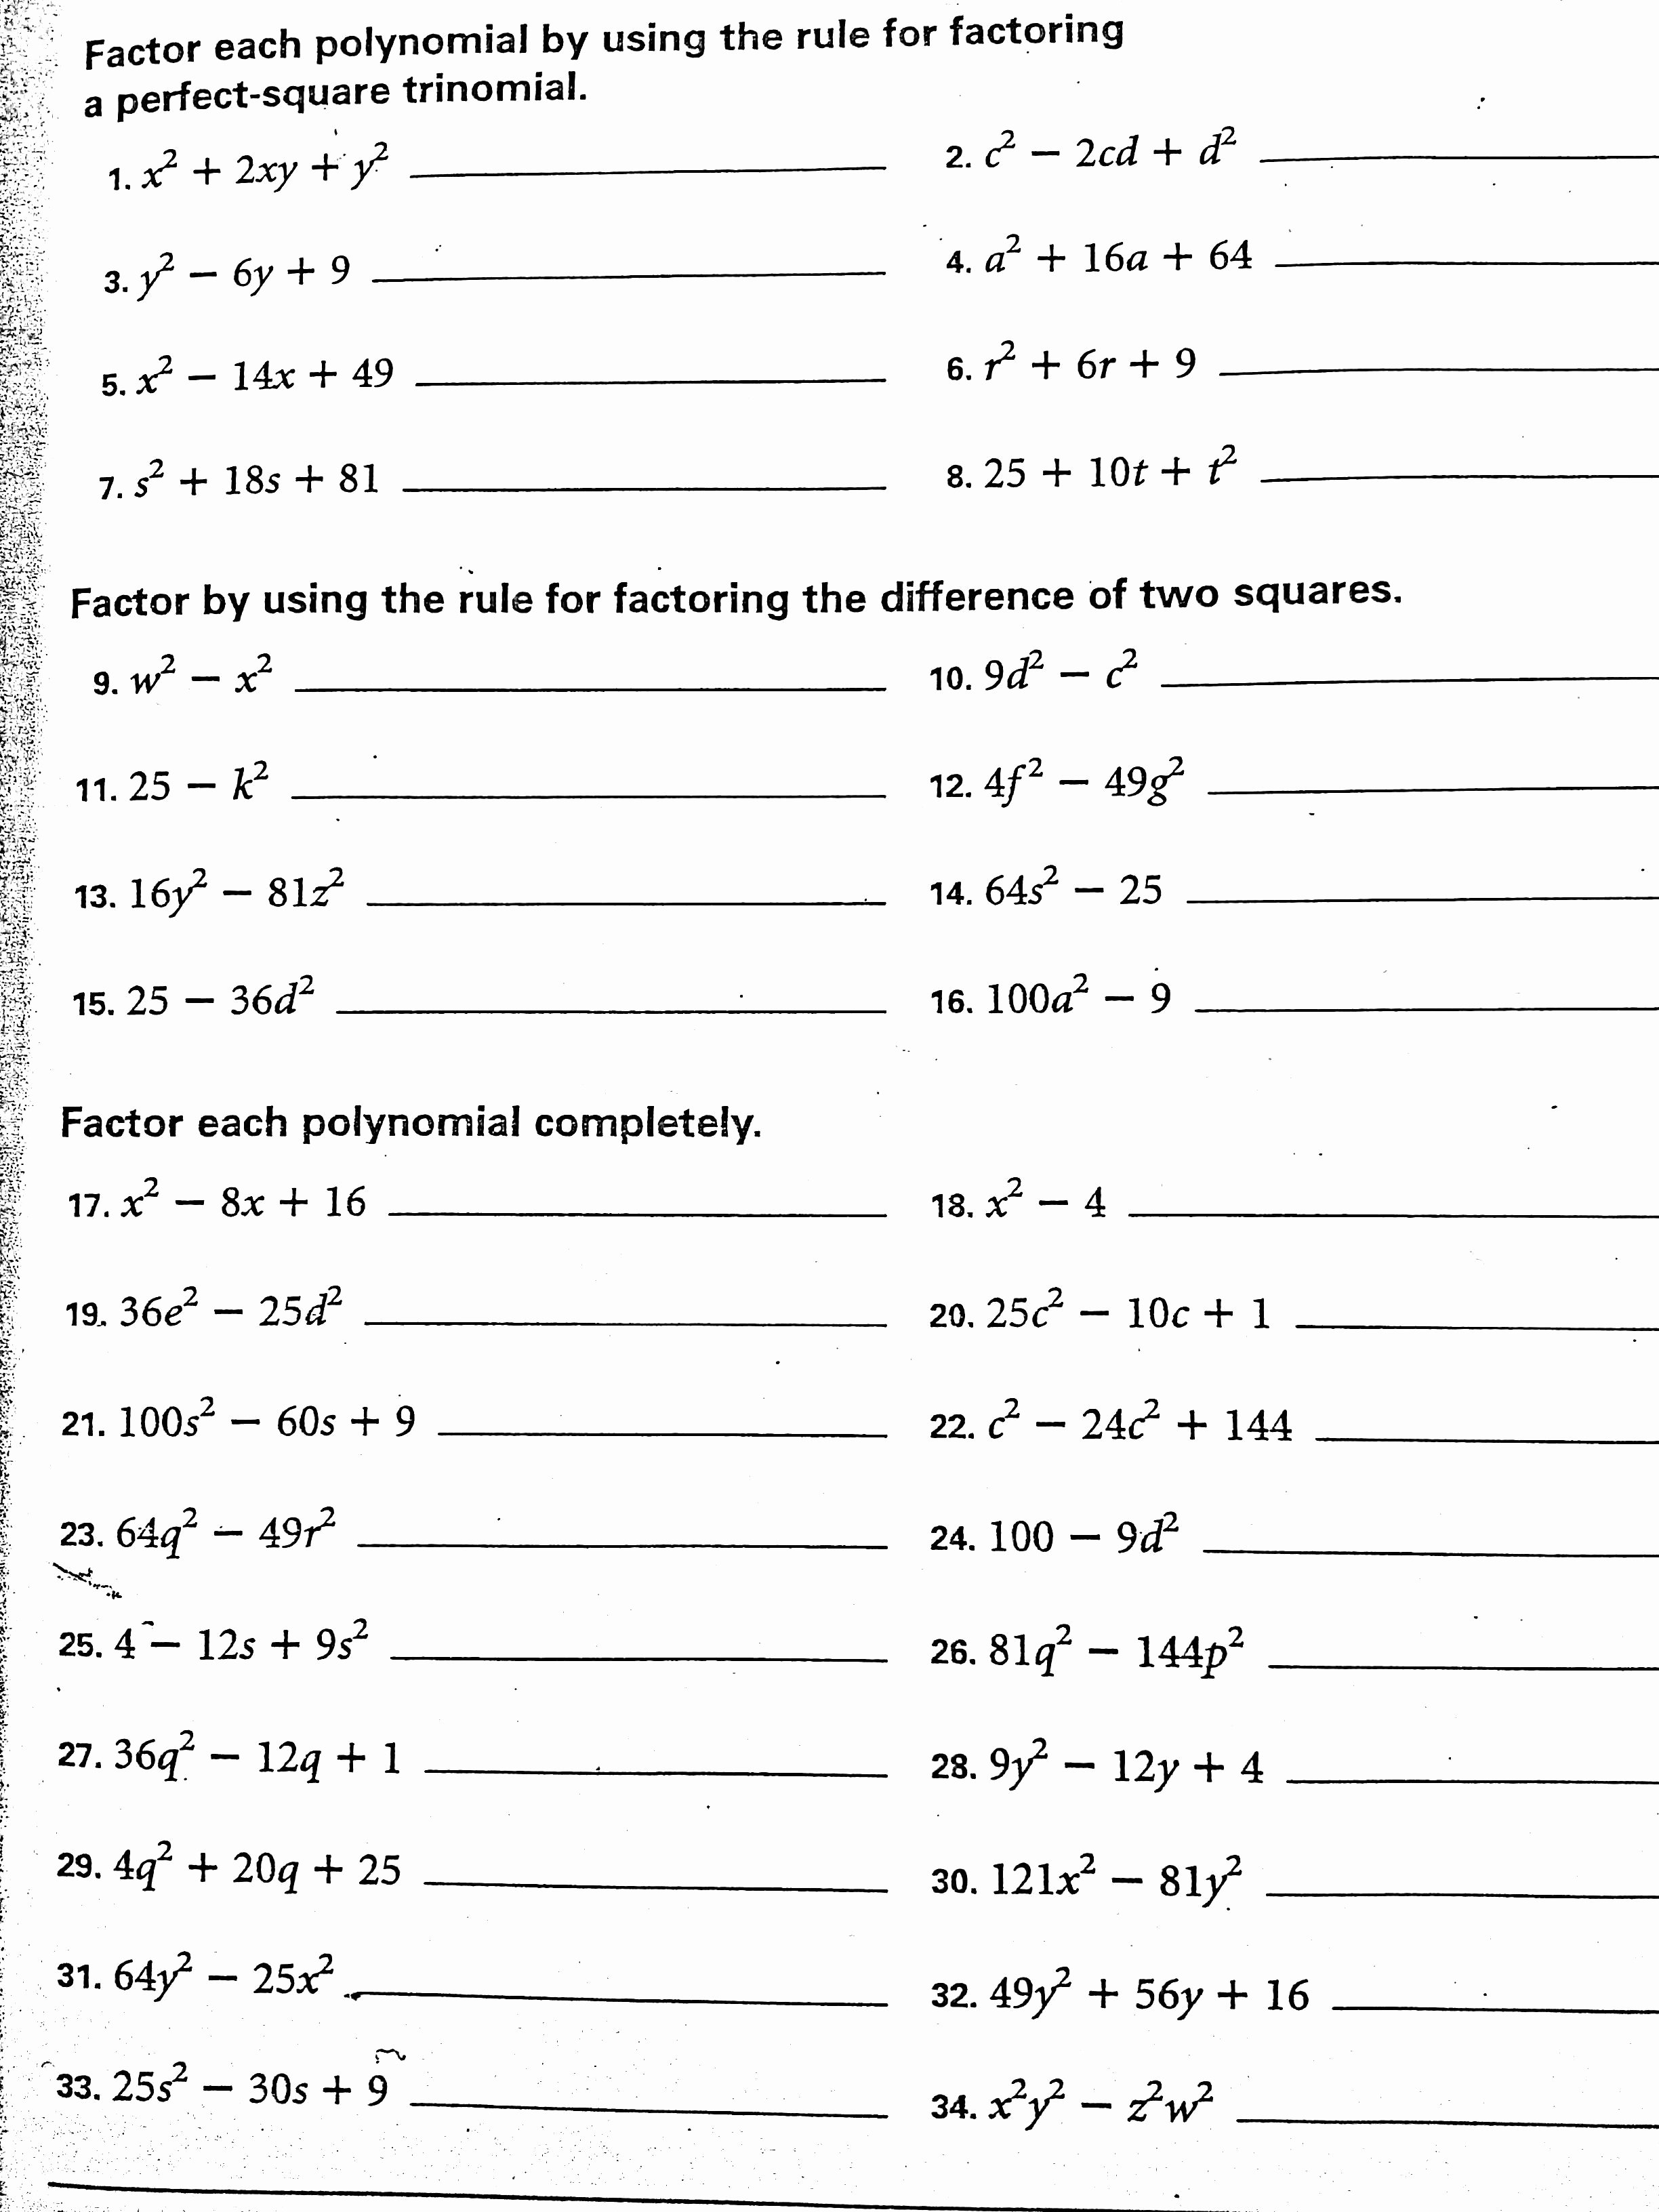 Factoring Difference Of Squares Worksheet New Algebra 1 assignments Swenson Math